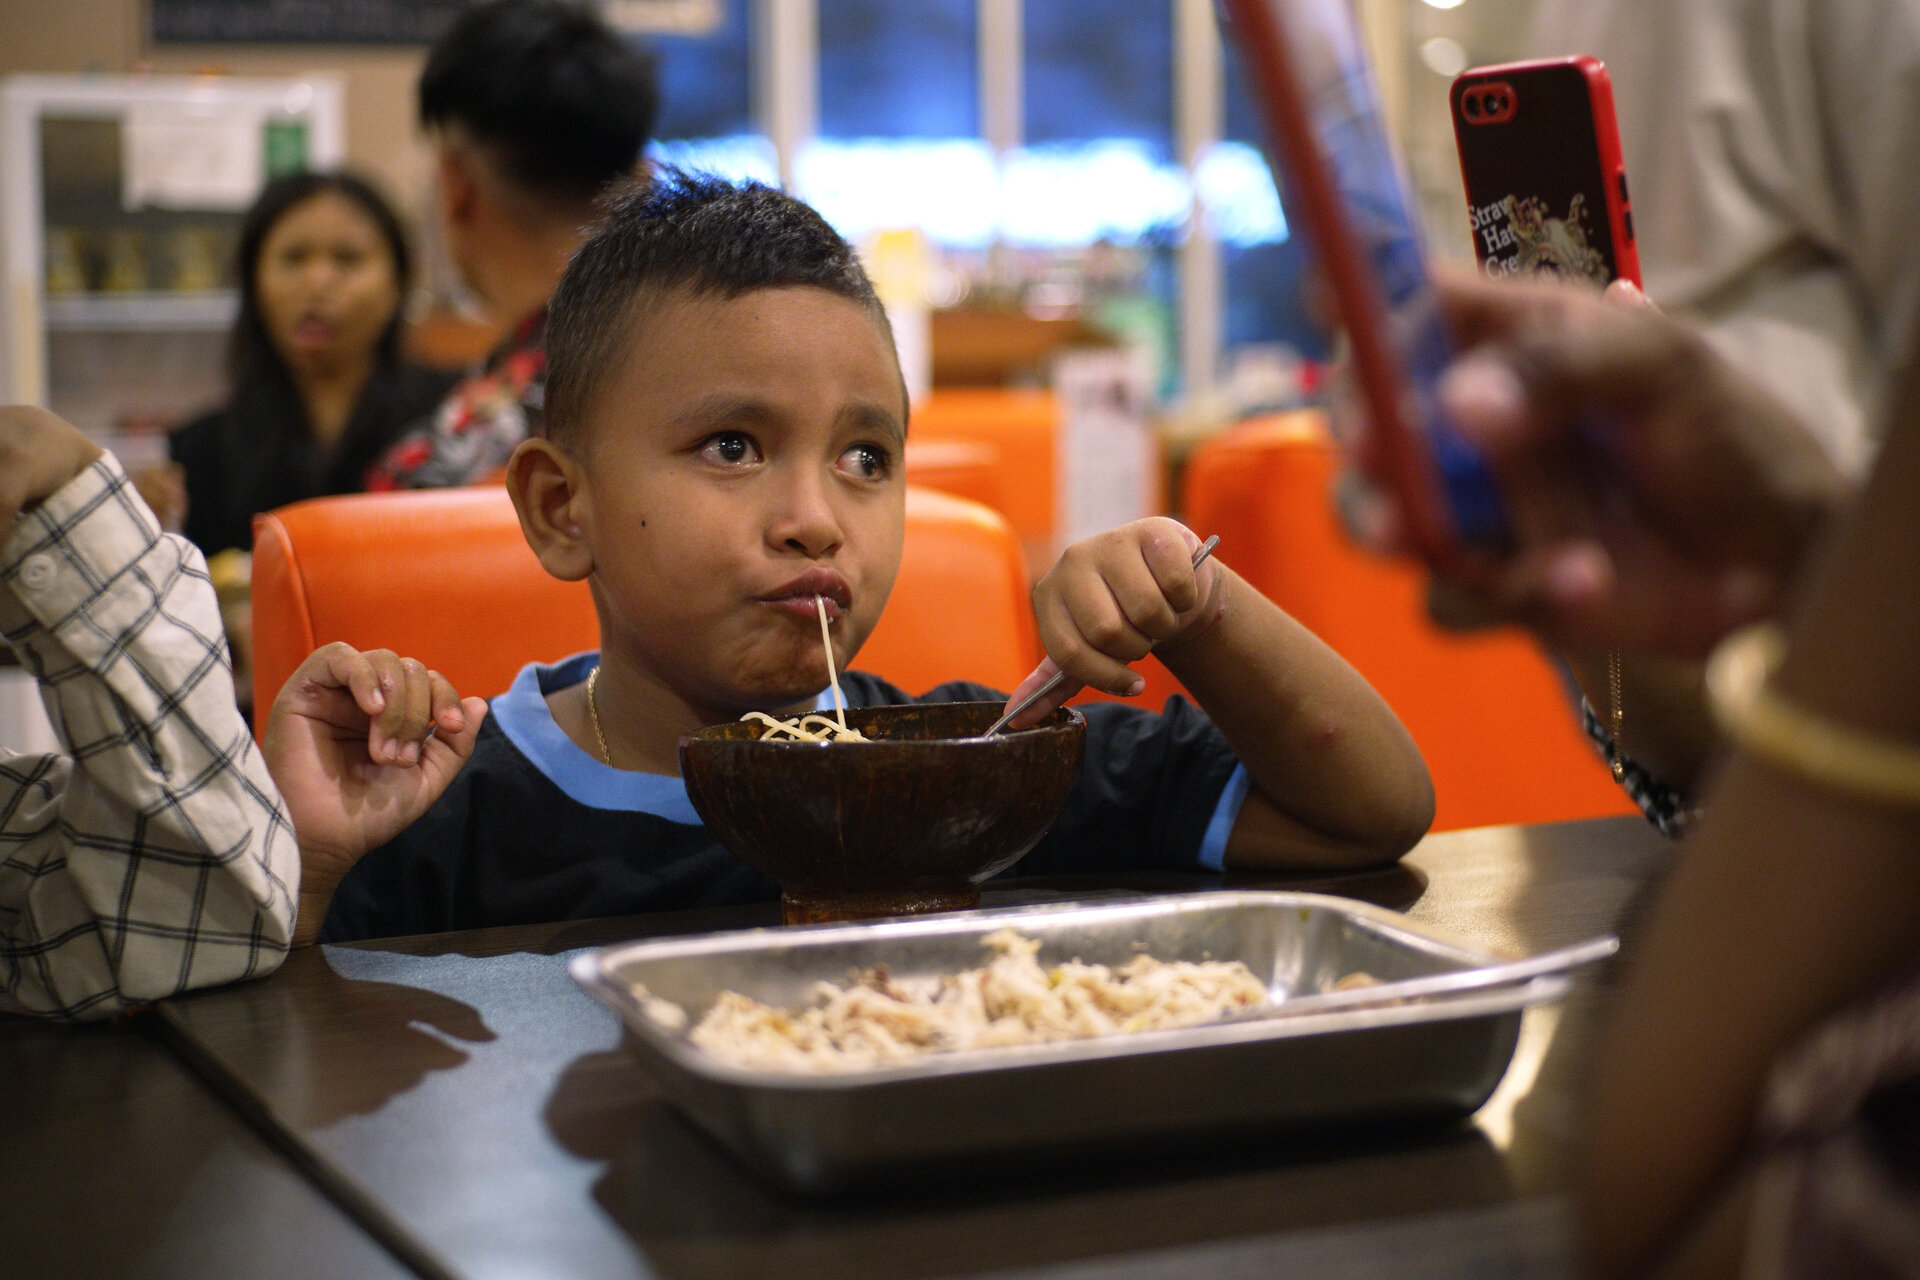 5-year-old Rain Takaeb loves Sischa’s tuna se’i aglio e olio. Deaf children often have special dietary needs, and CafeIn’s se’i pasta is a rare MSG-free umami treat.